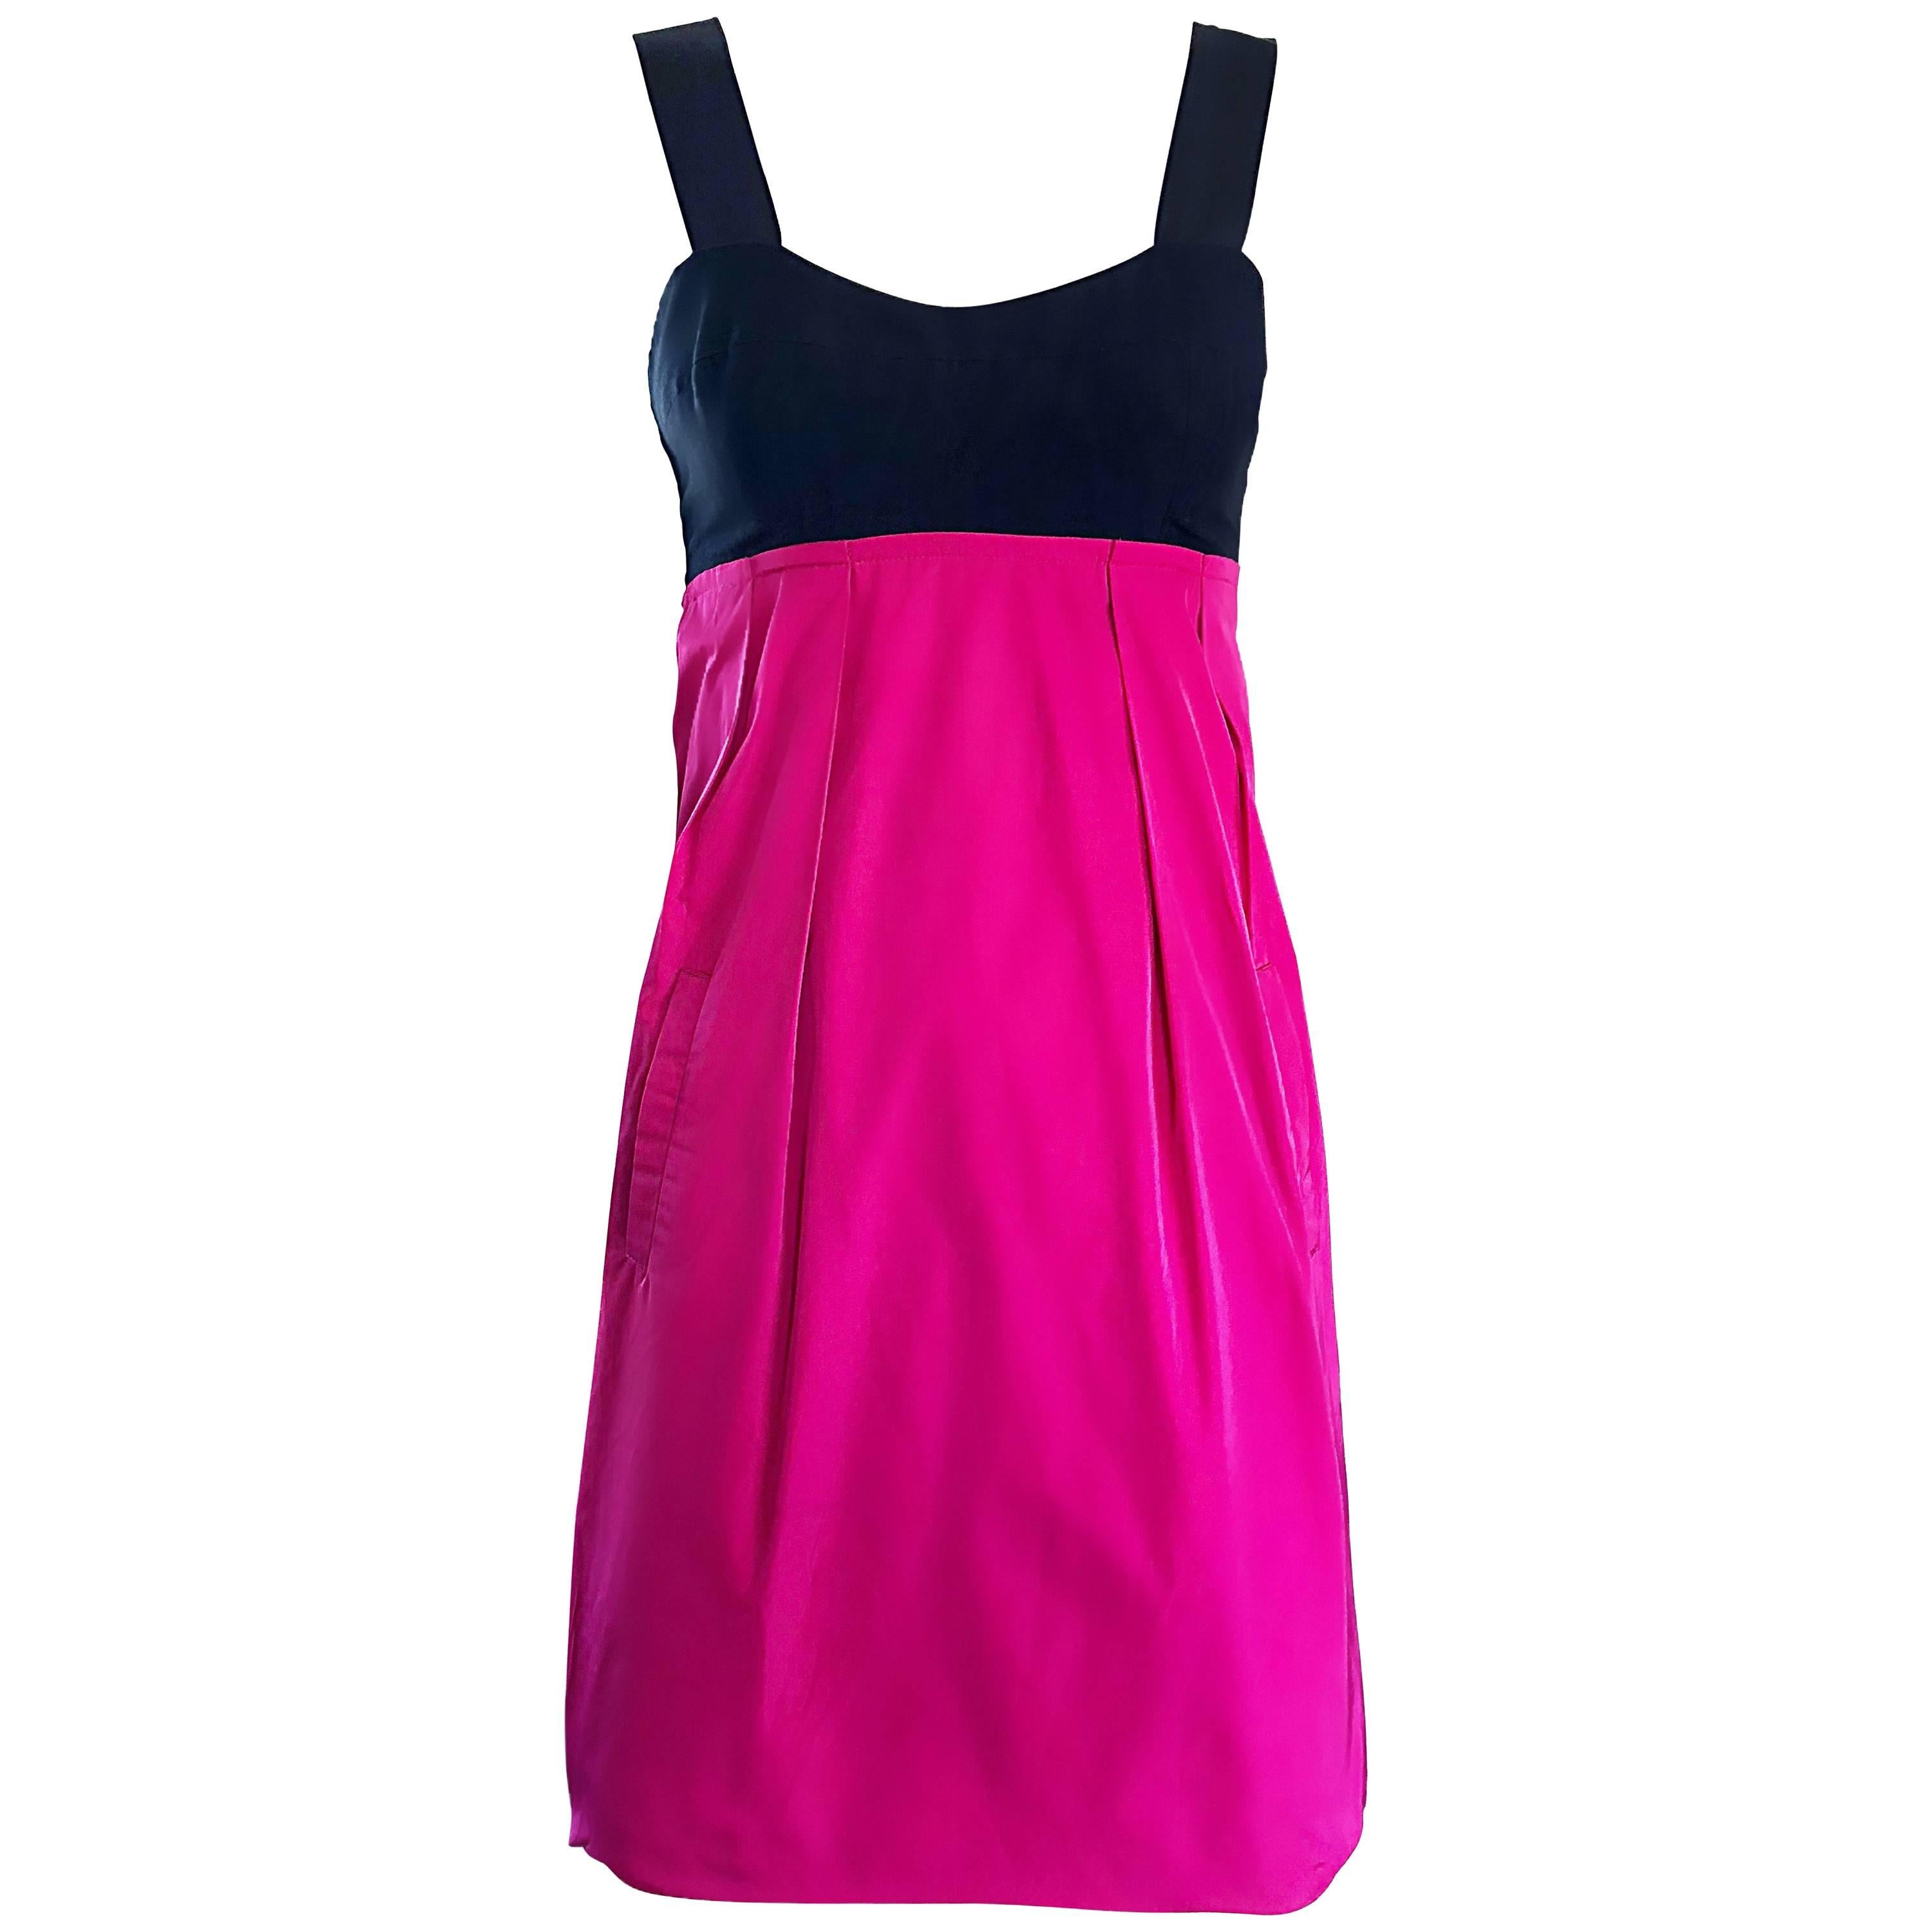 Yigal Azrouel Size 2 / 4 Hot Pink and Black Color Block Open Back Shift Dress